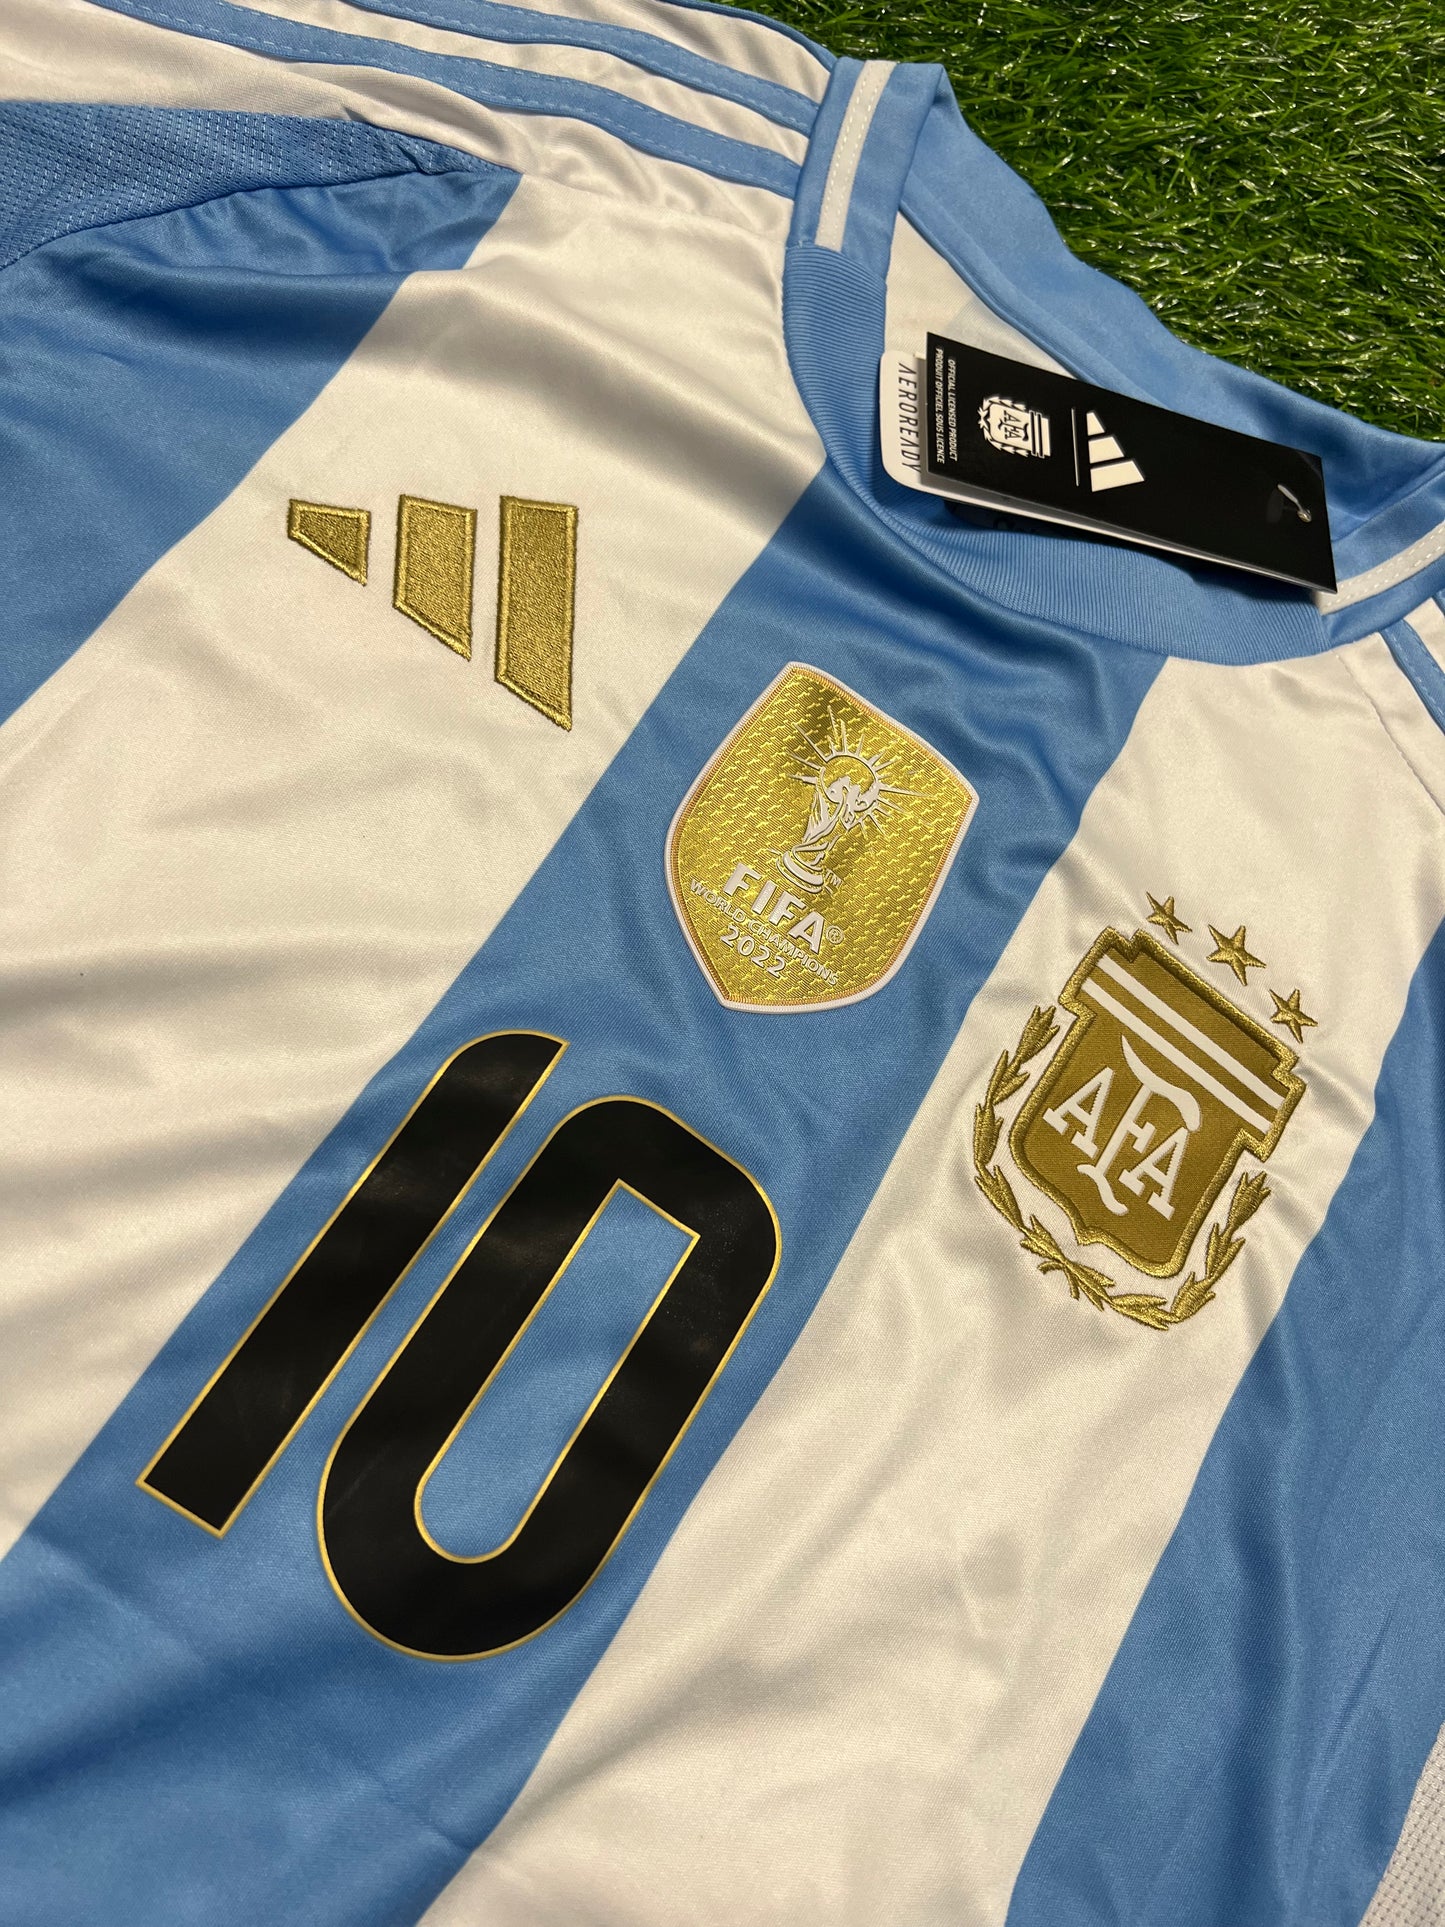 2024 Argentina Home Jersey | MESSI #10